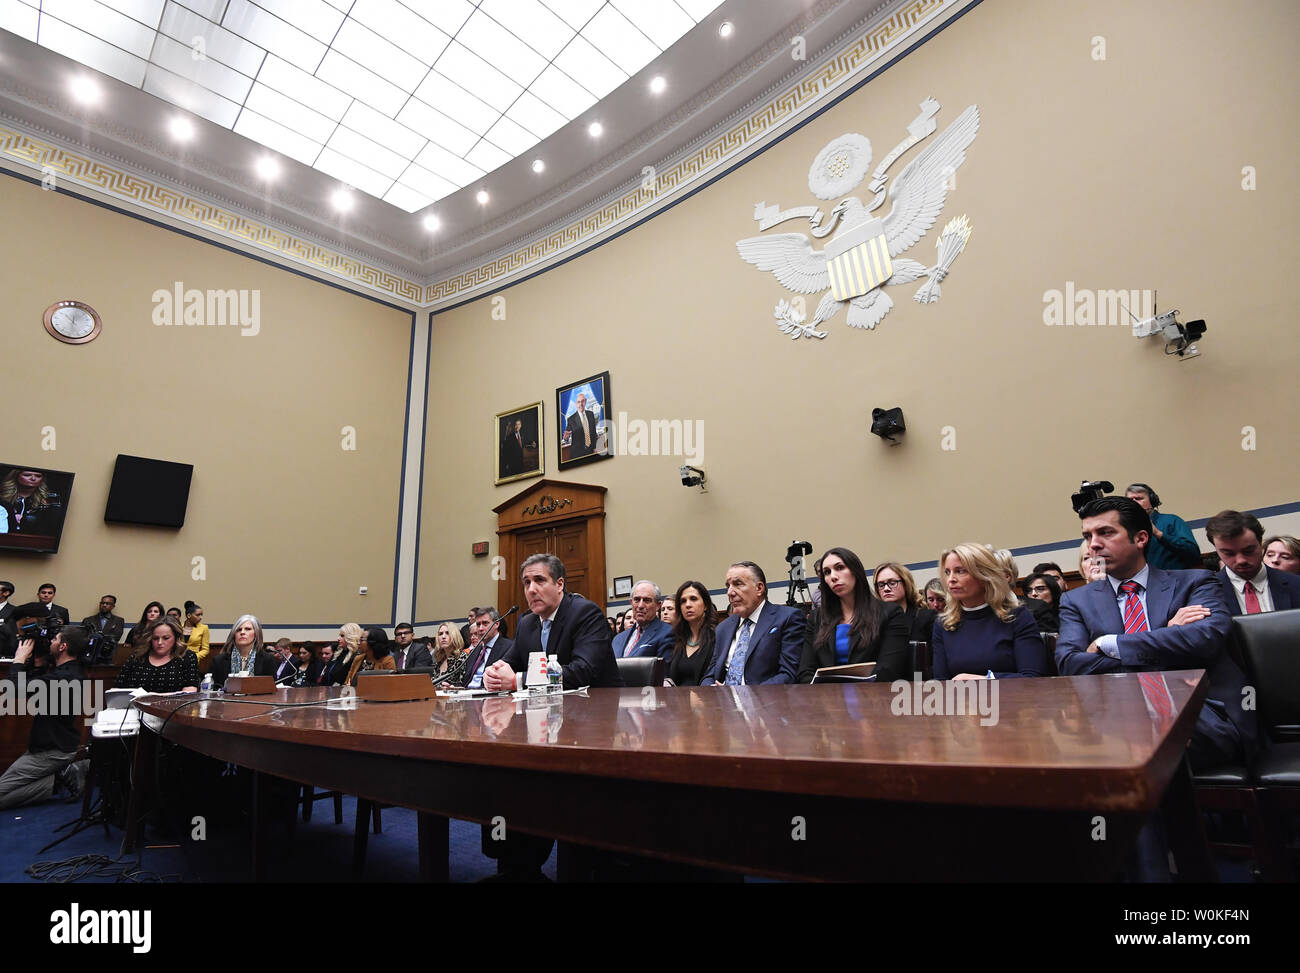 Attorney Michael D. Cohen testifies before the House Oversight Committee on February 27, 2019 in Washington DC. Cohen, once one of President Trump's most trusted aides and lawyers, took the witness stand for his first and only public appearance before Congress on Wednesday to discuss the President's personal character and possible criminal conduct.      Photo by Pat Benic/UPI Stock Photo